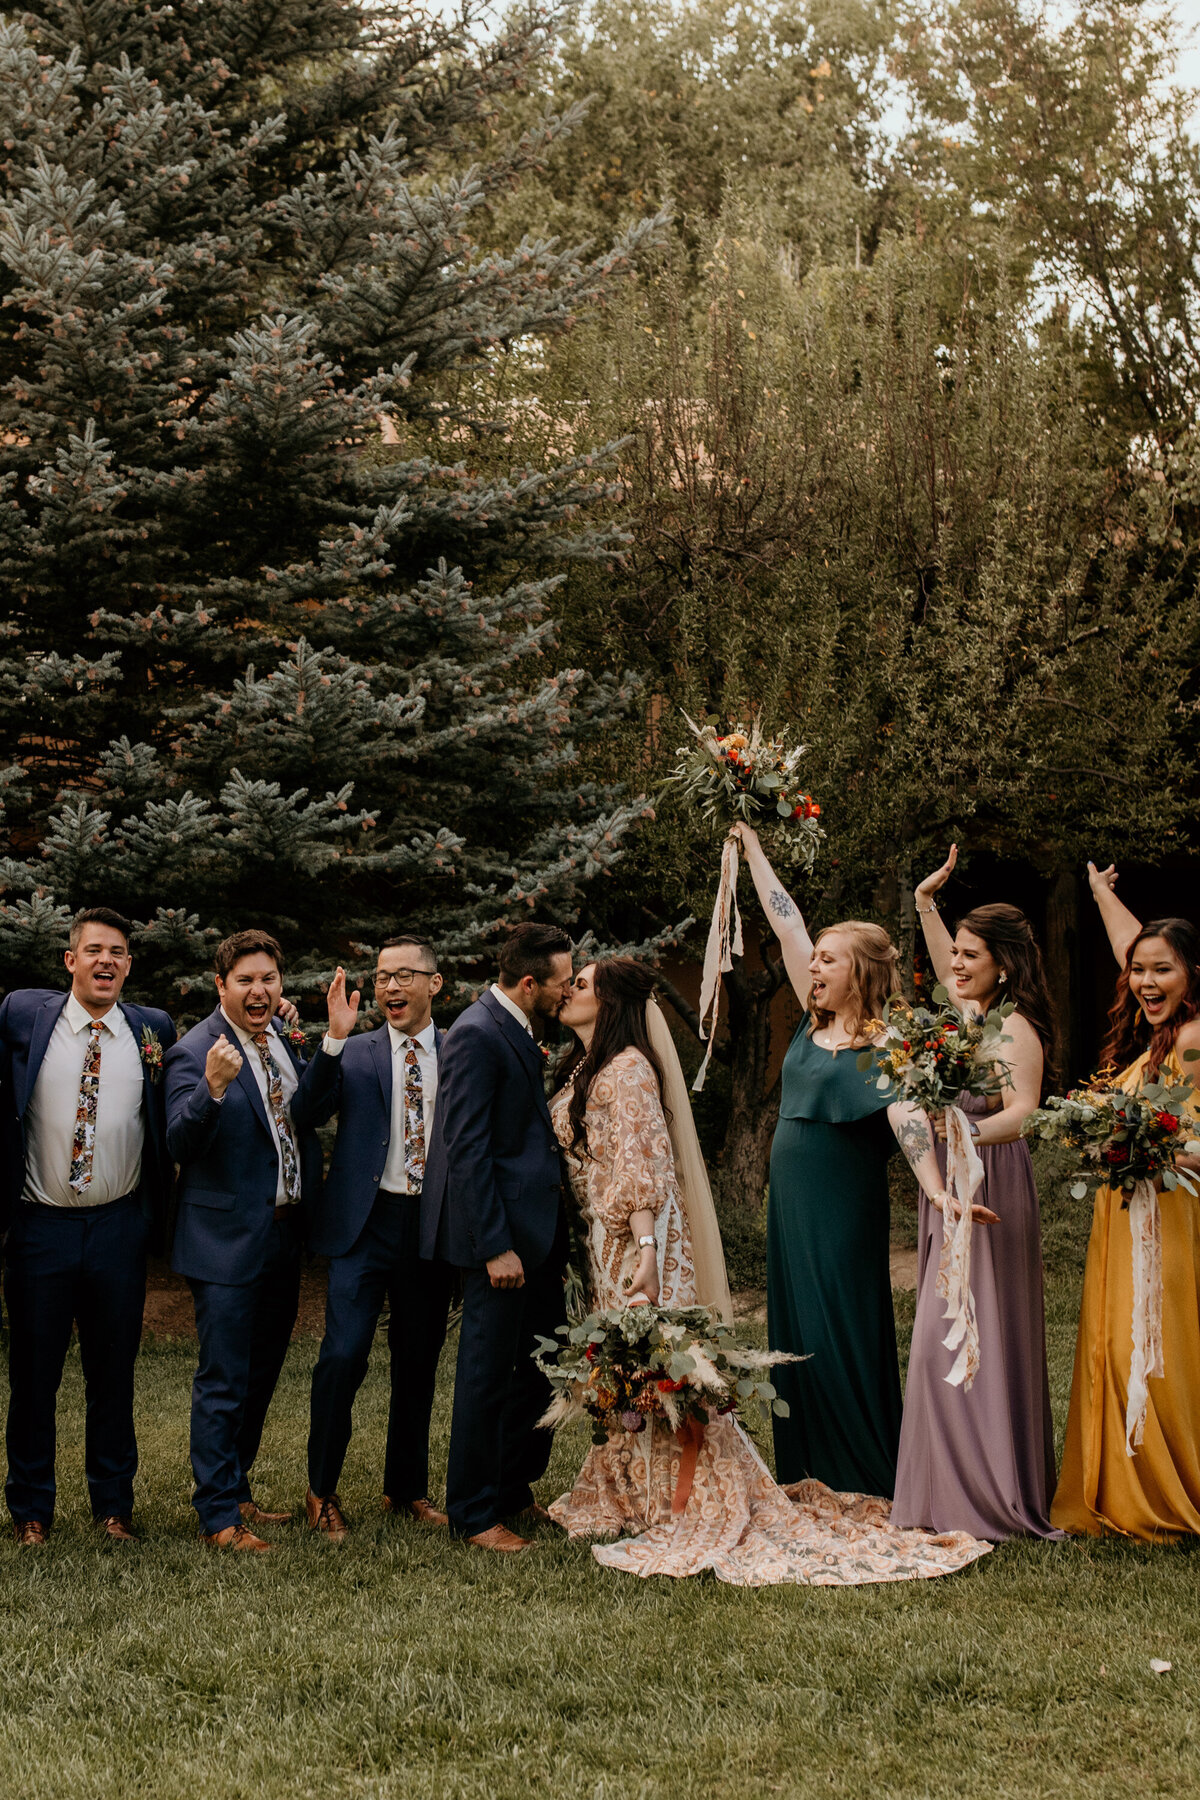 bride and groom with wedding party in Taos